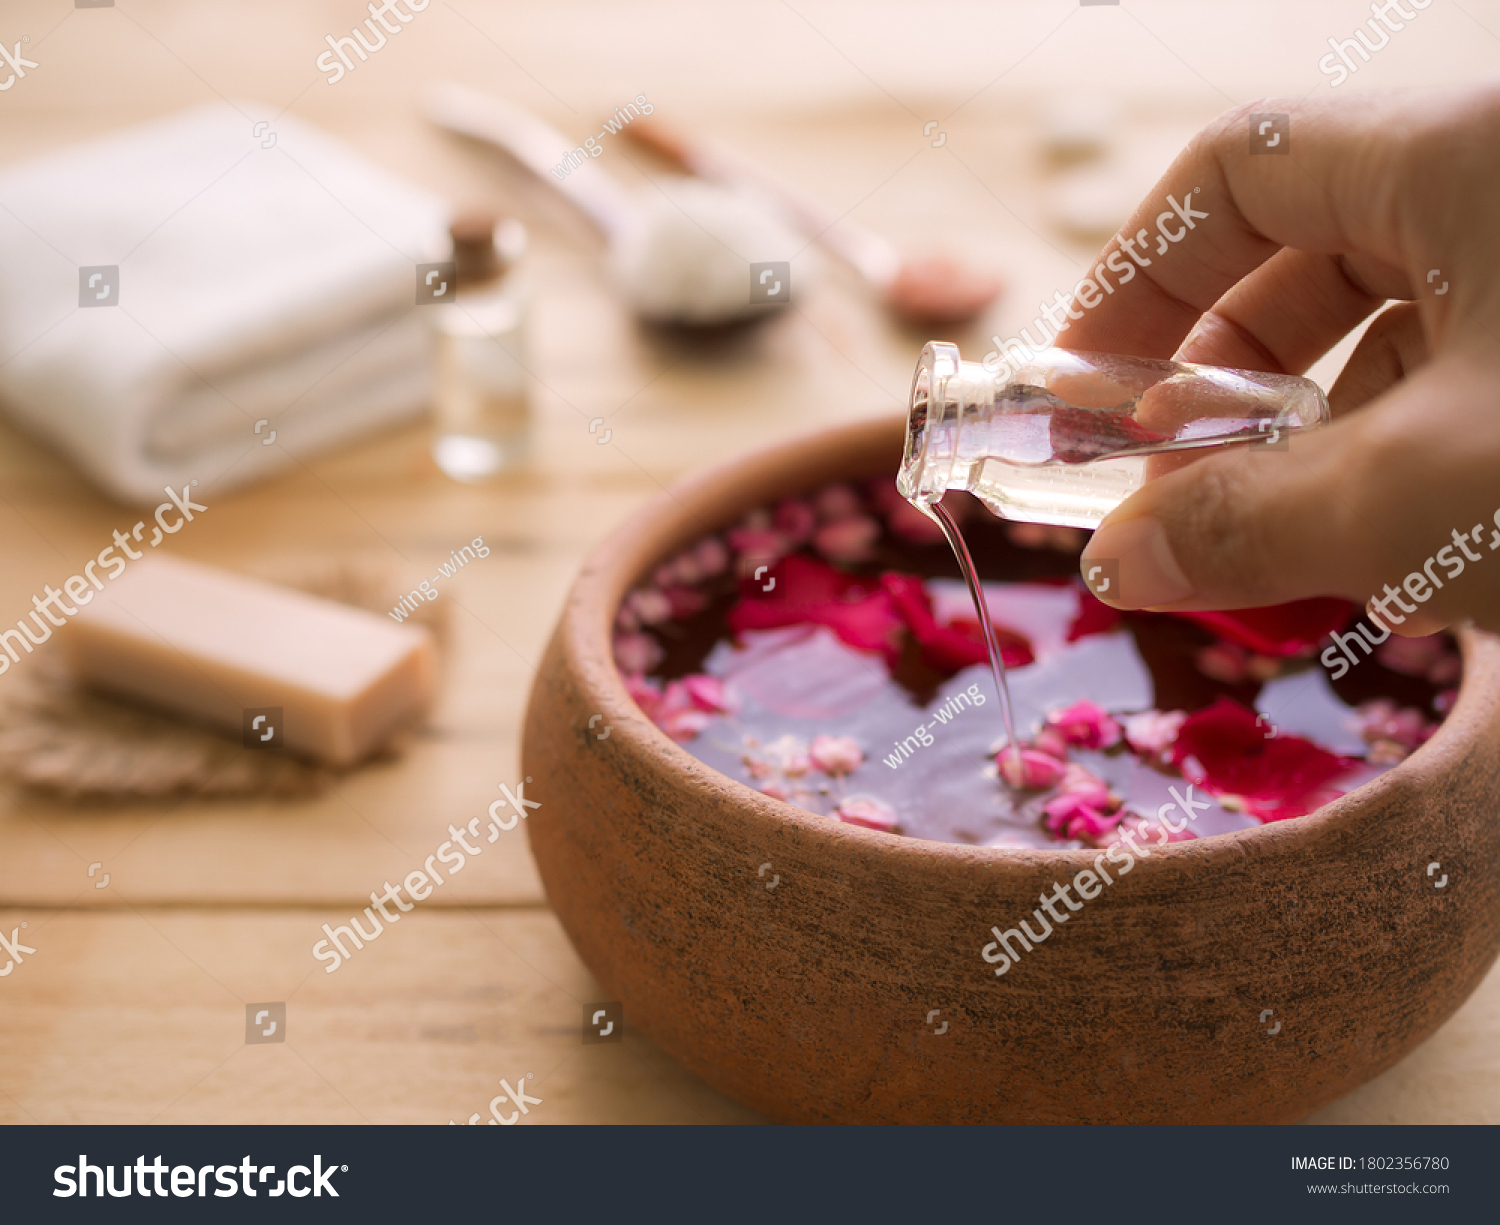 Hand pour coconut oil in to aroma smell rose with blur image of soap, towel, massage oil, salt spa on wood background.  Aroma therapy spa set for luxury hotel or professional massage salons concept. #1802356780